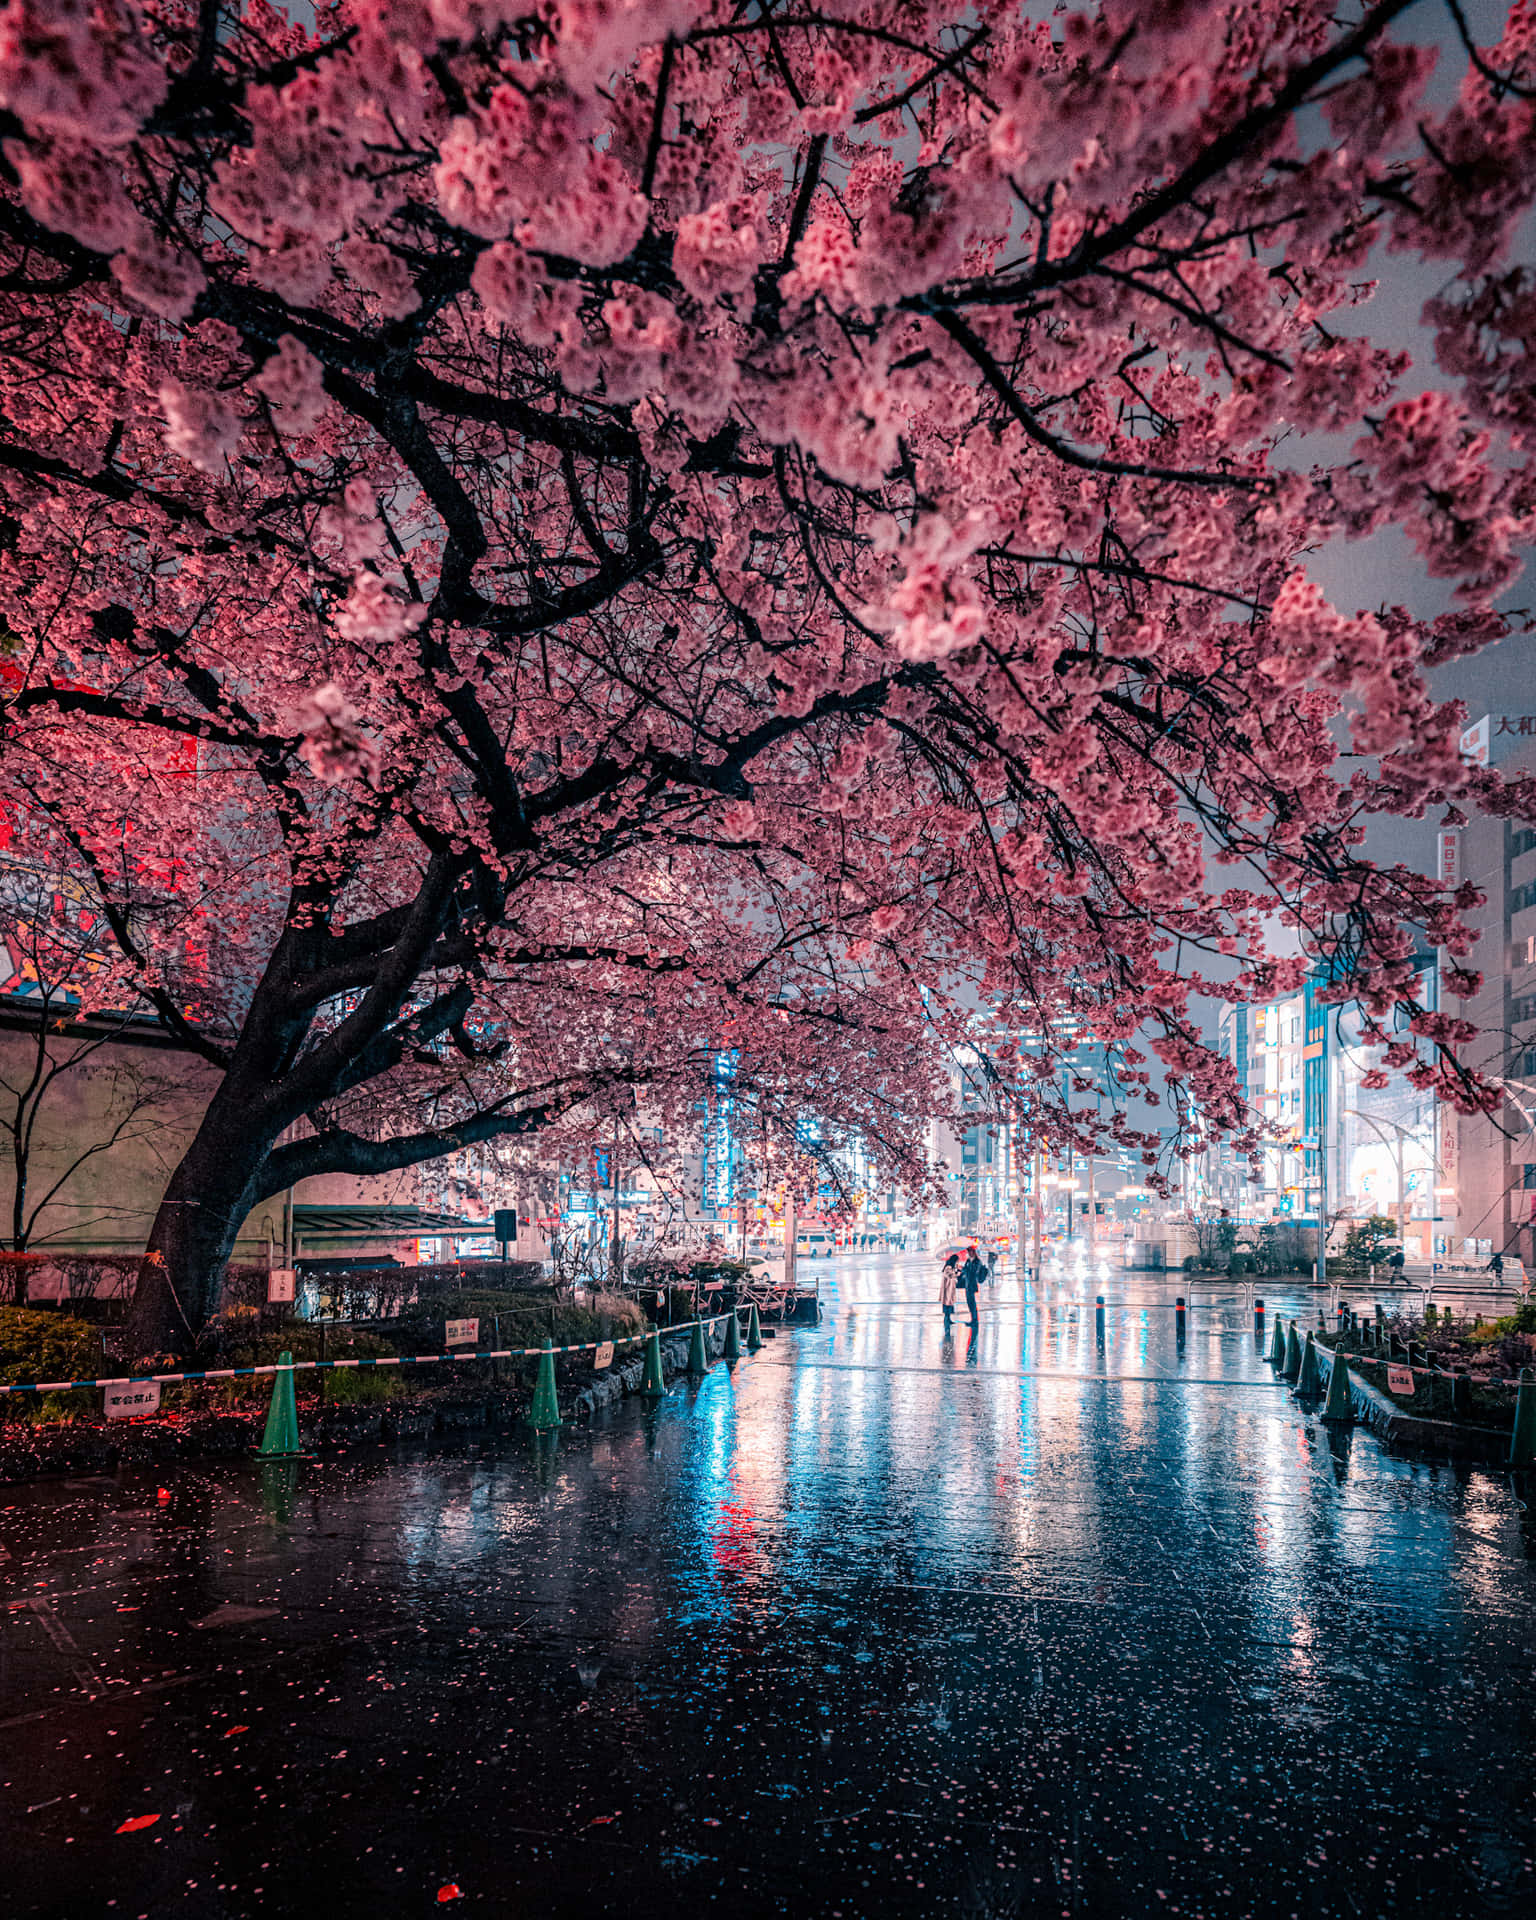 Captivating night view of pink cherry blossom trees Wallpaper